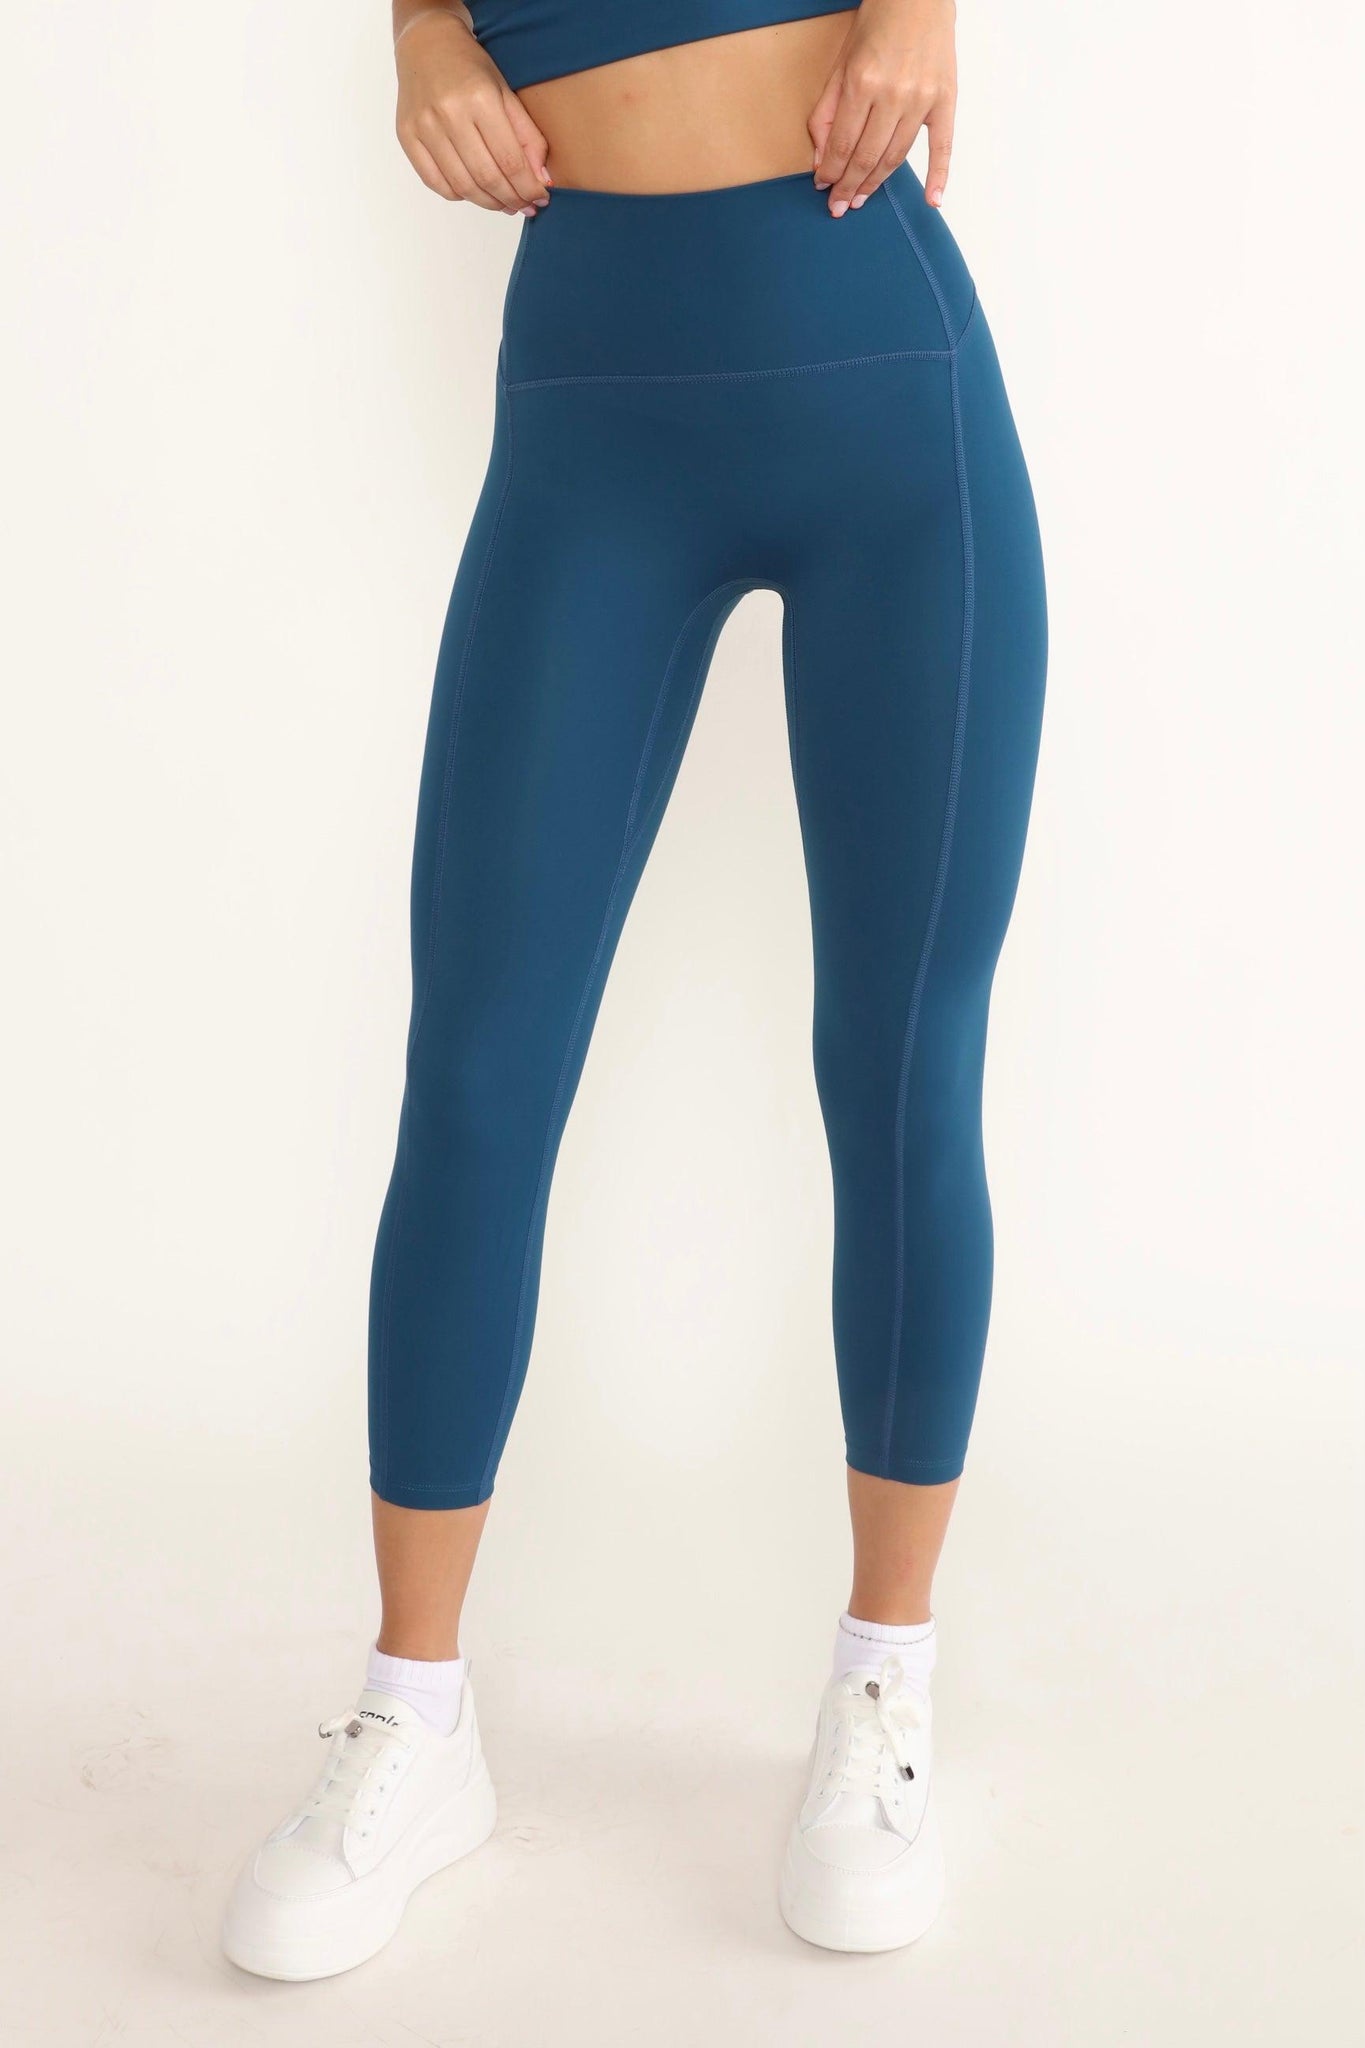 JUV unicorn legging in blue color, close up front view.